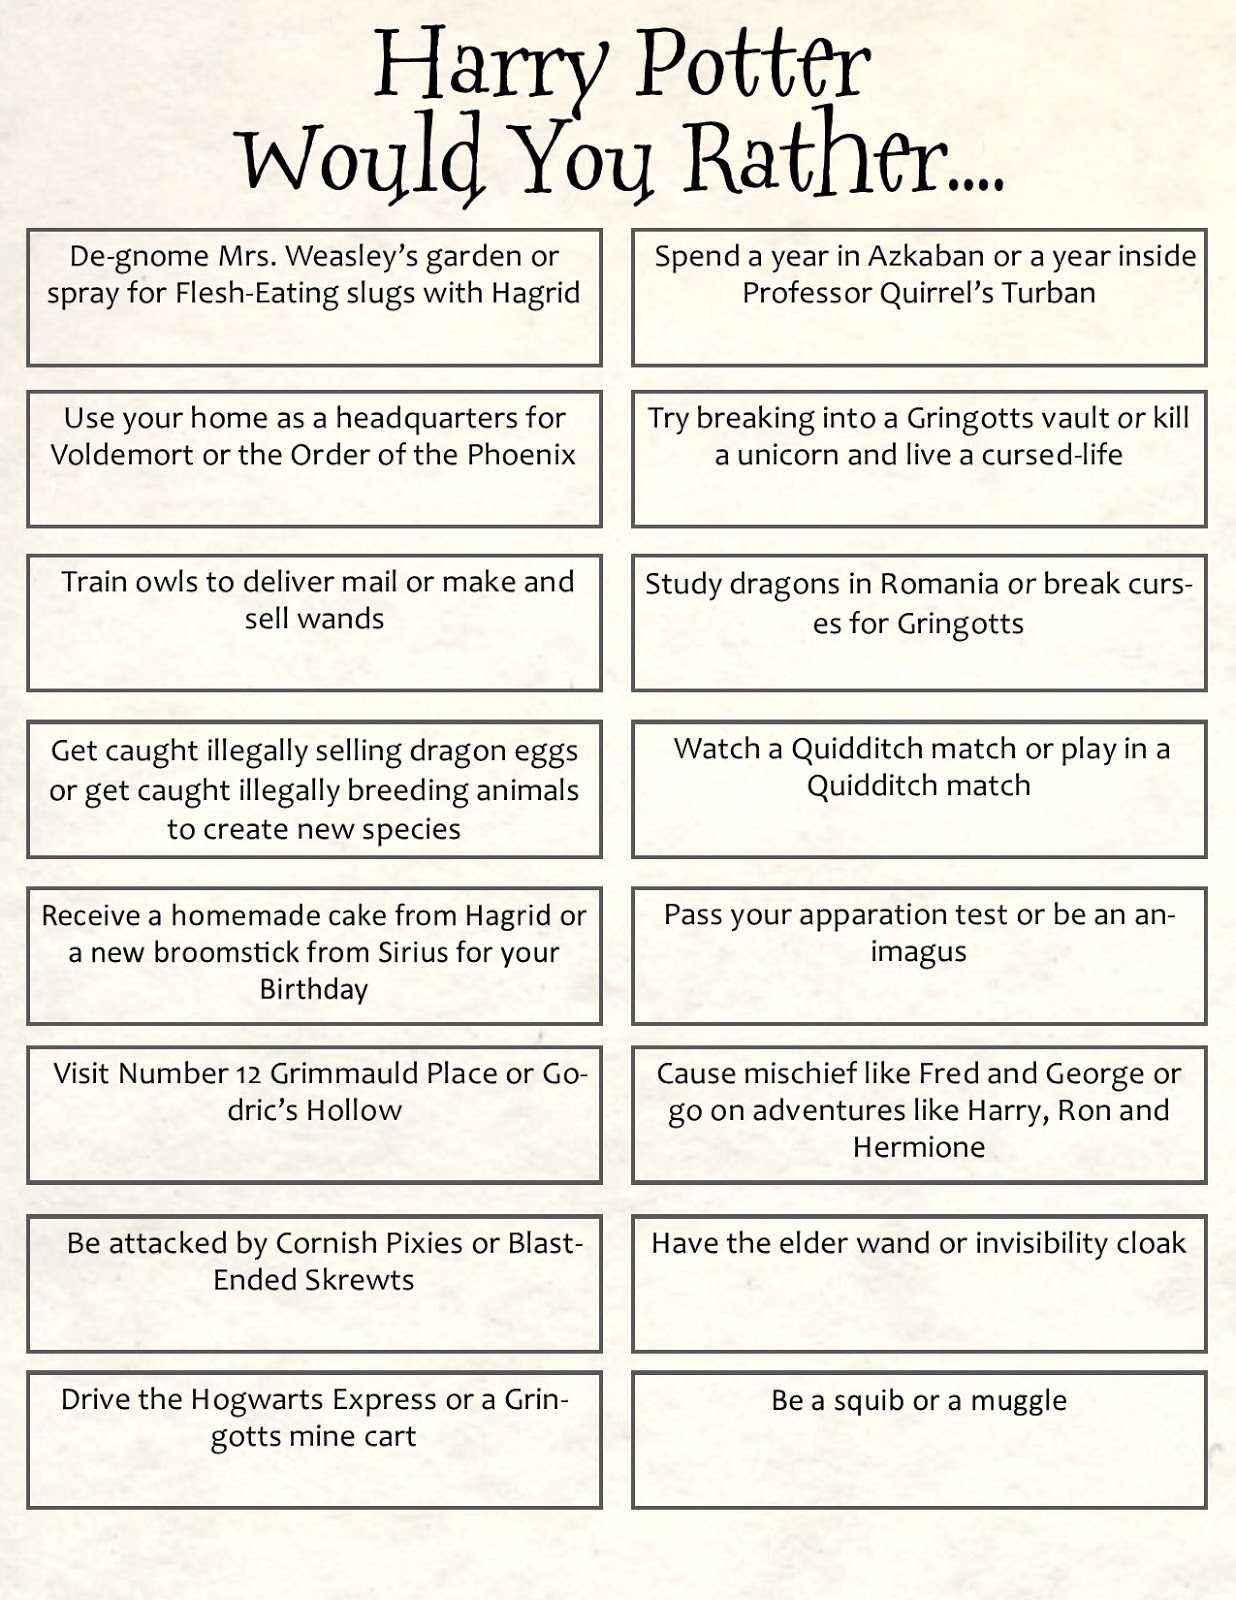 Harry Potter Trivia Questions And Answers